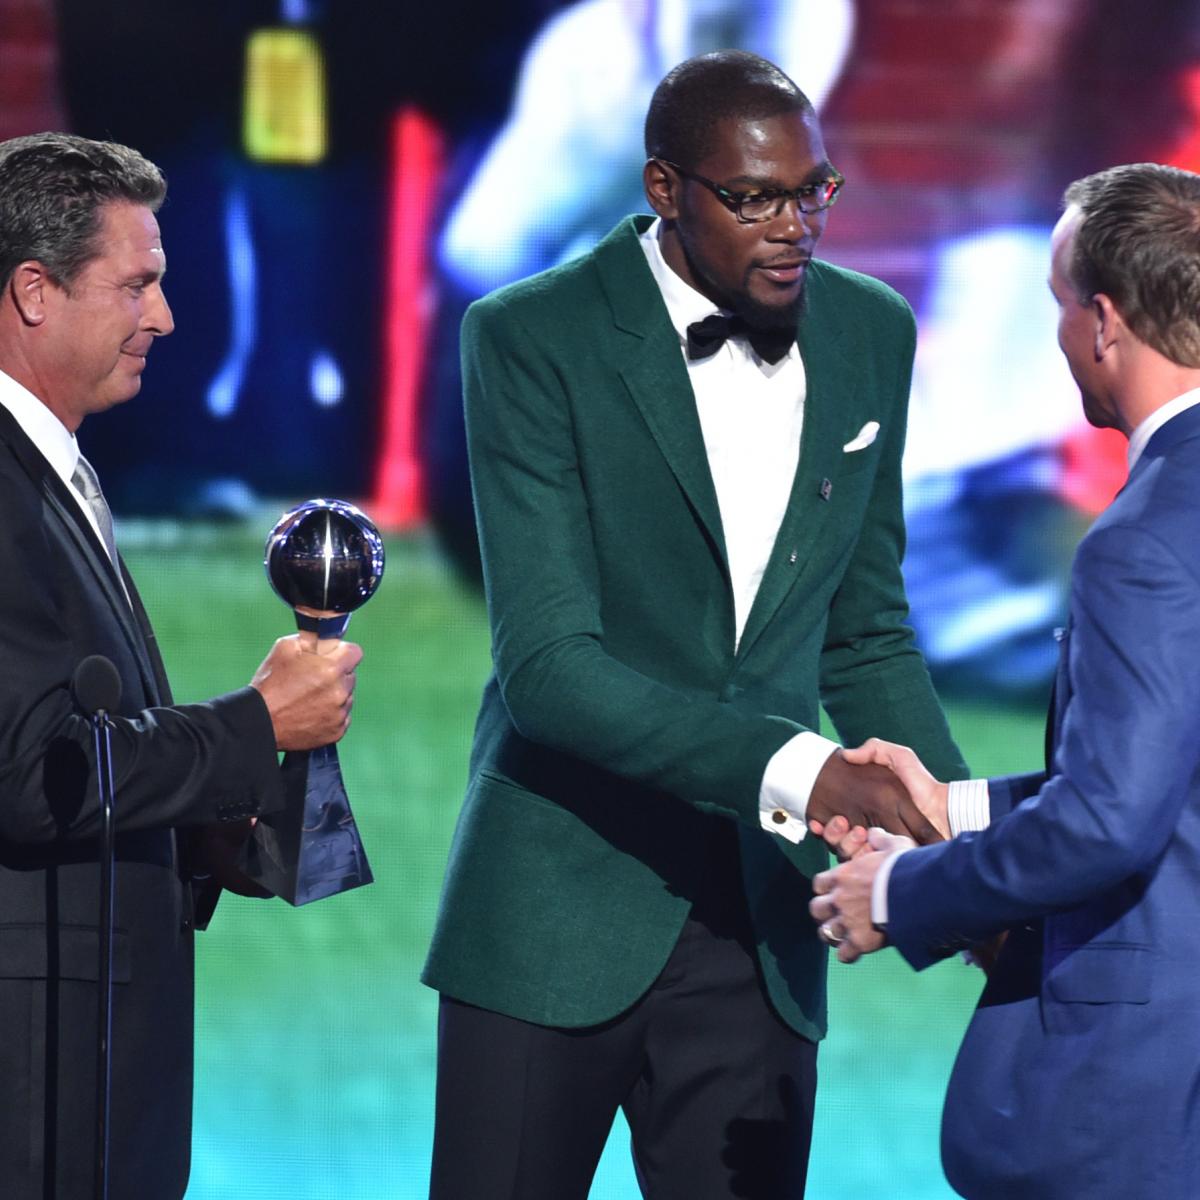 ESPY 2014 Winners: Most Surprising Award Results from ESPN's Event ...